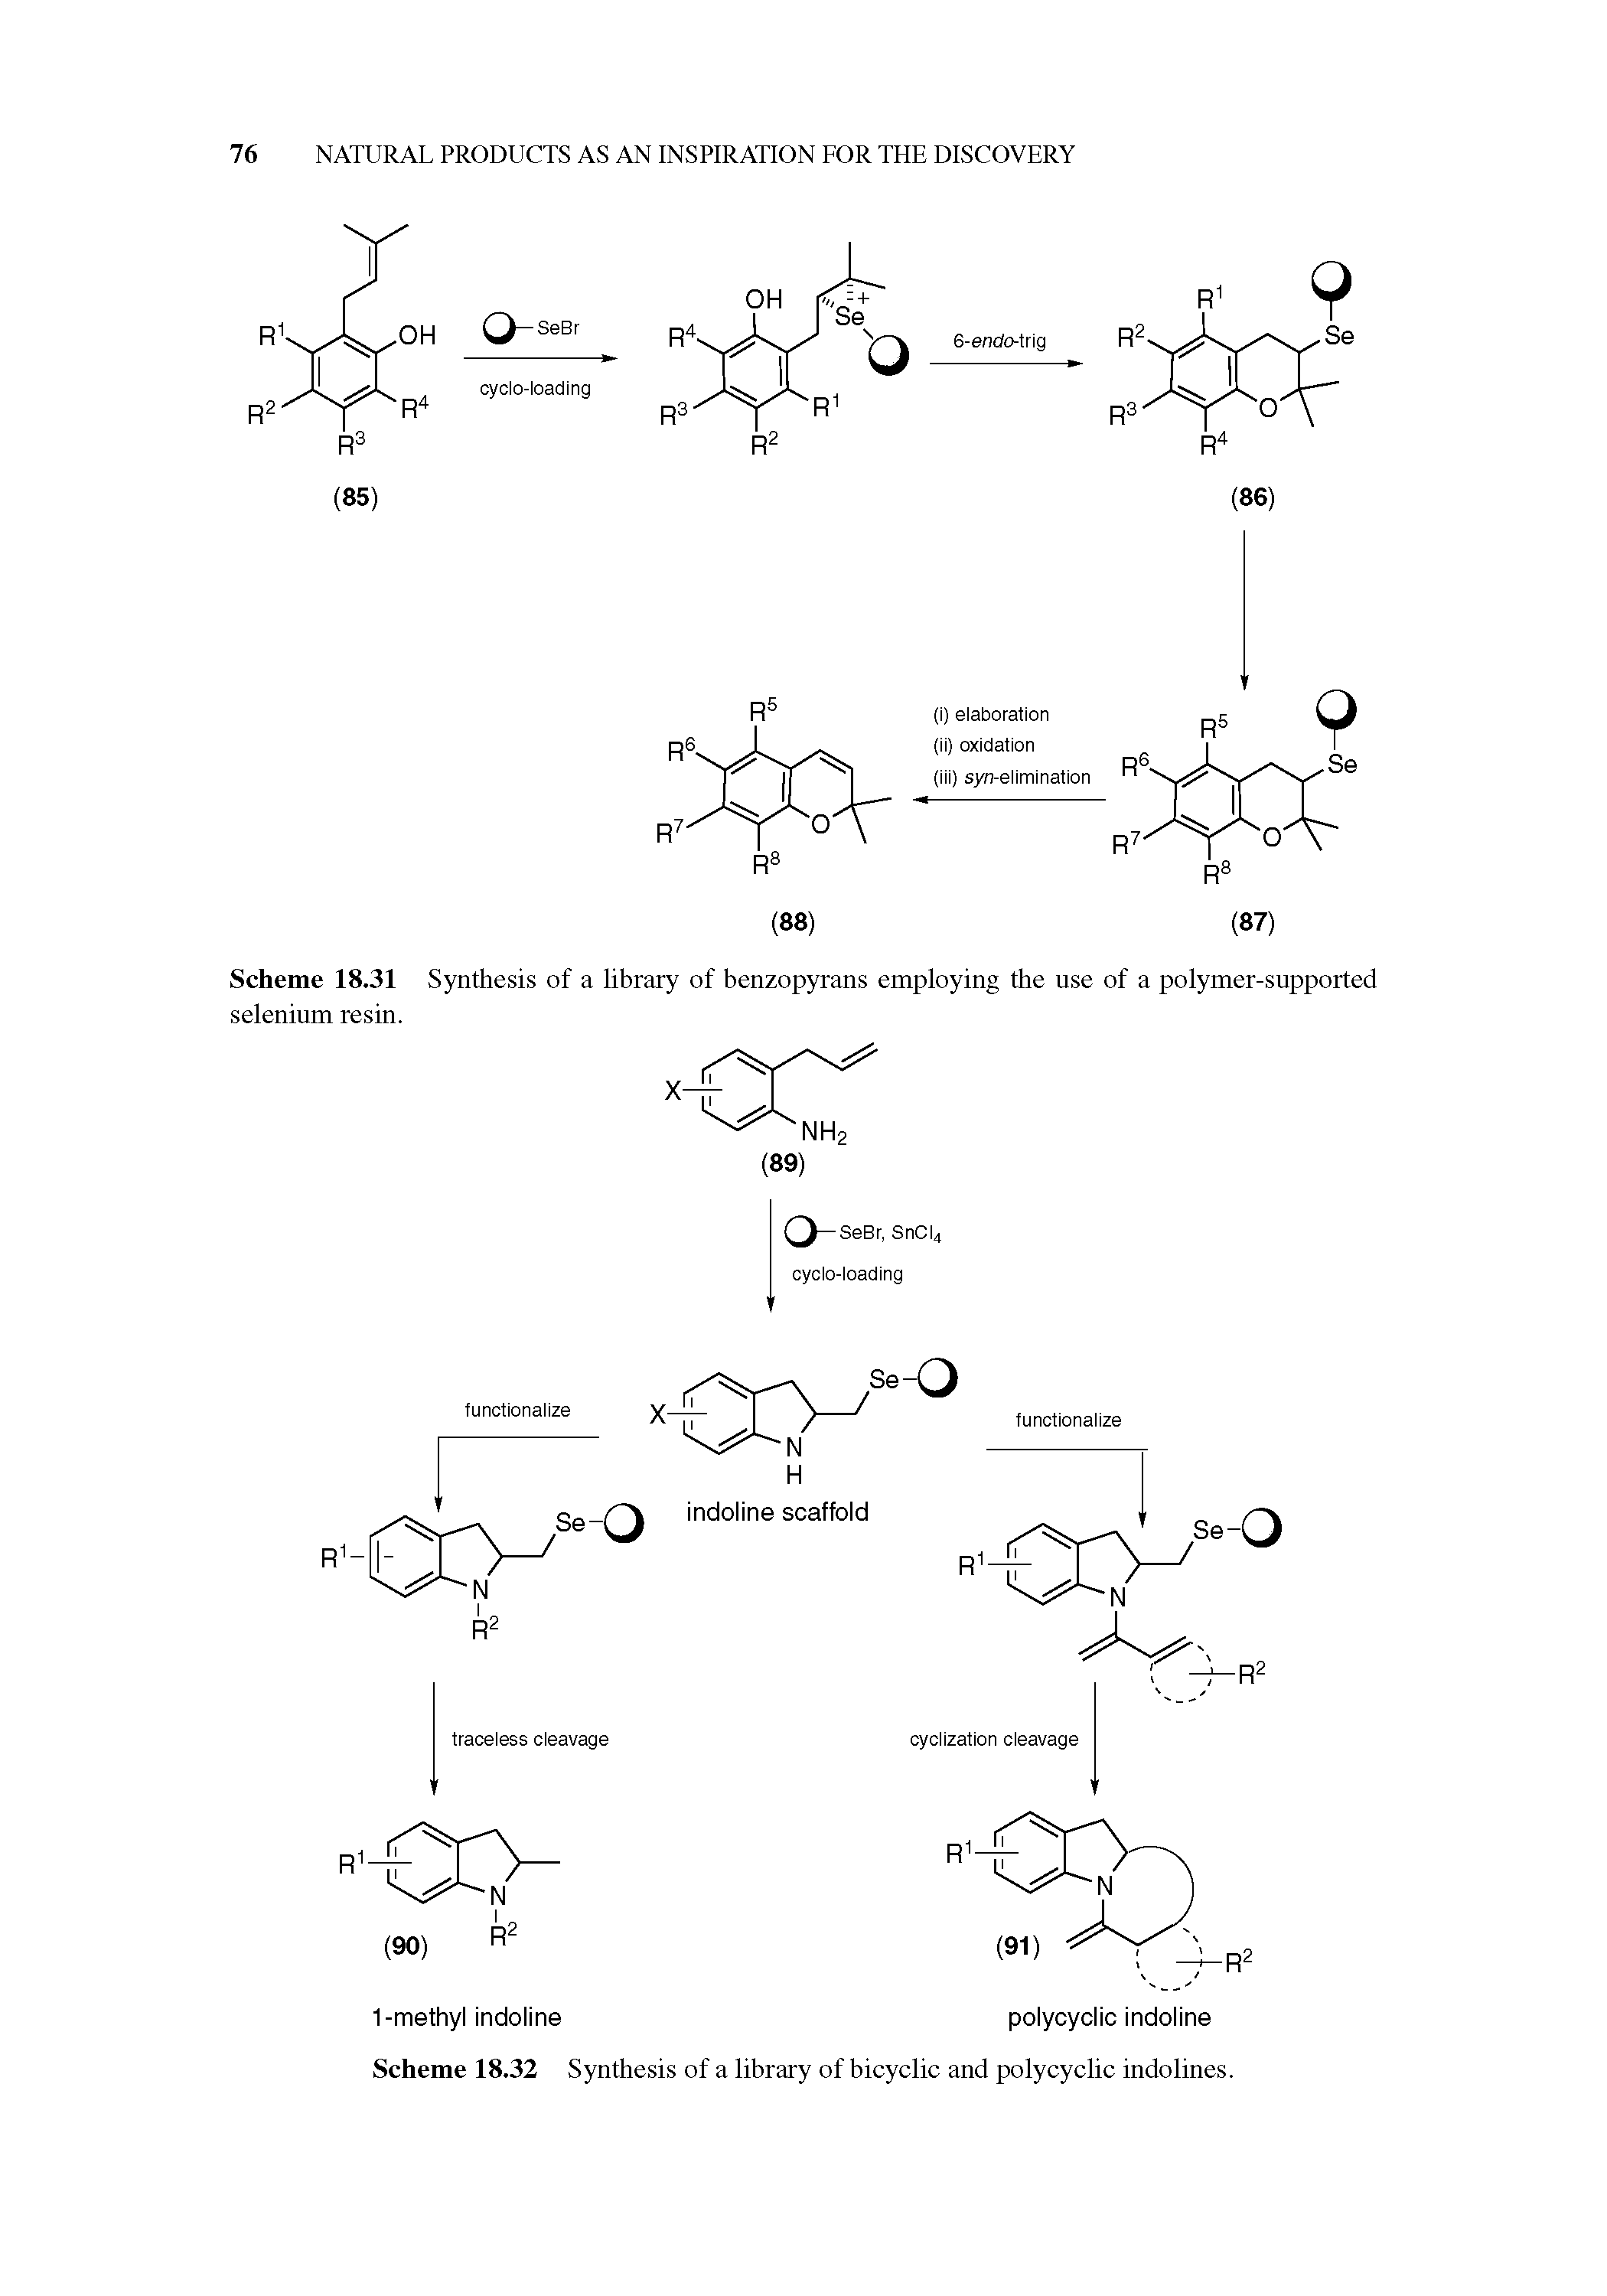 Scheme 18.32 Synthesis of a library of bicyclic and polycyclic indolines.